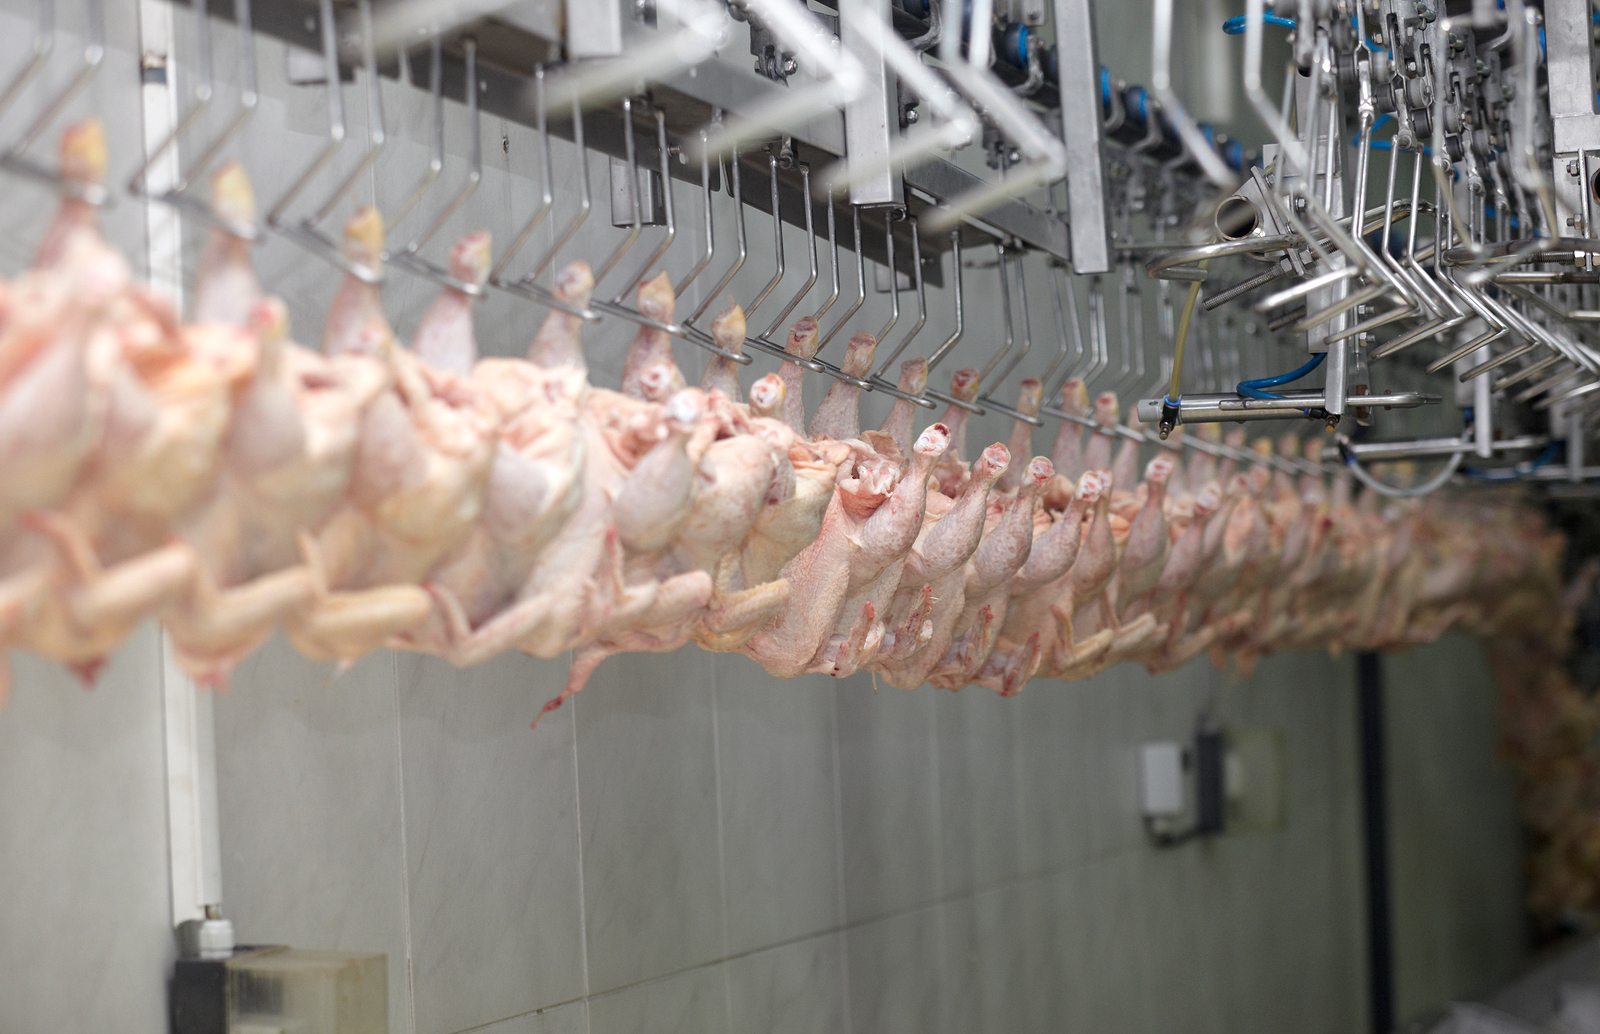 bigstock-poultry-processing-meat-food-i-10846256